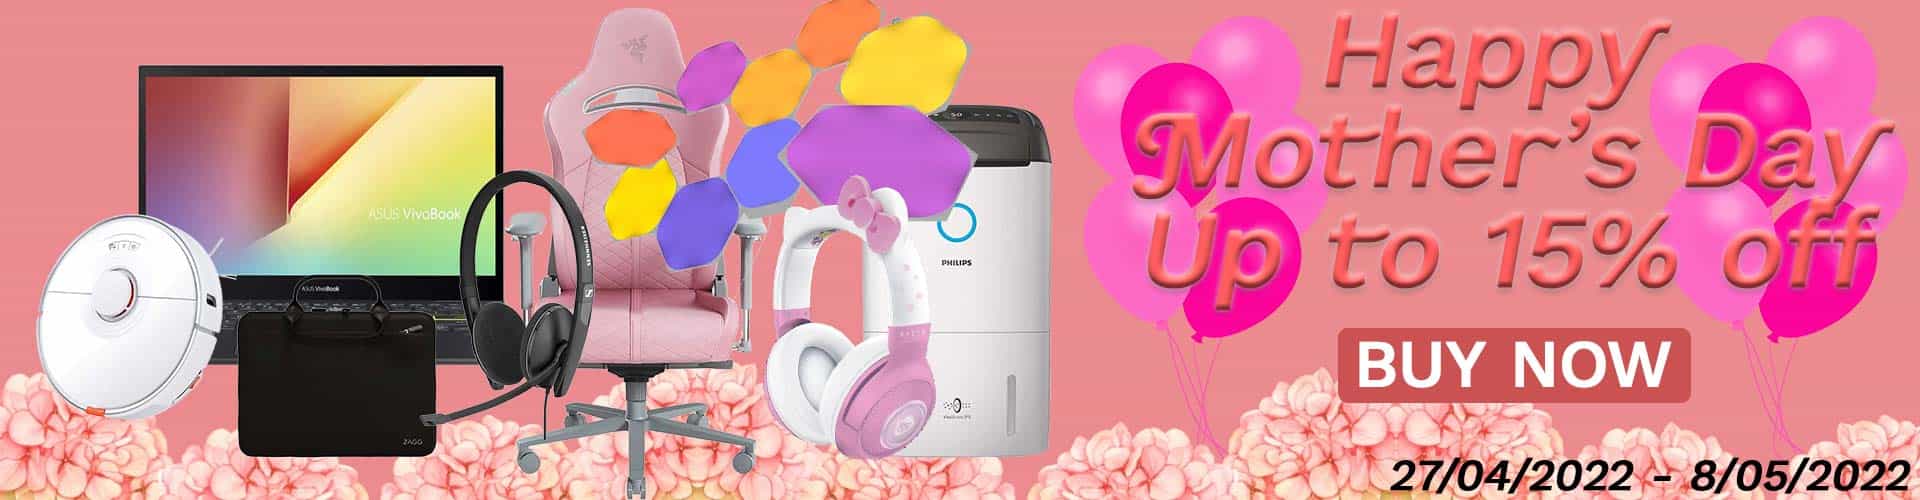 Wireless 1 Mother's Day extra up to 15% OFF on selected items with coupon code